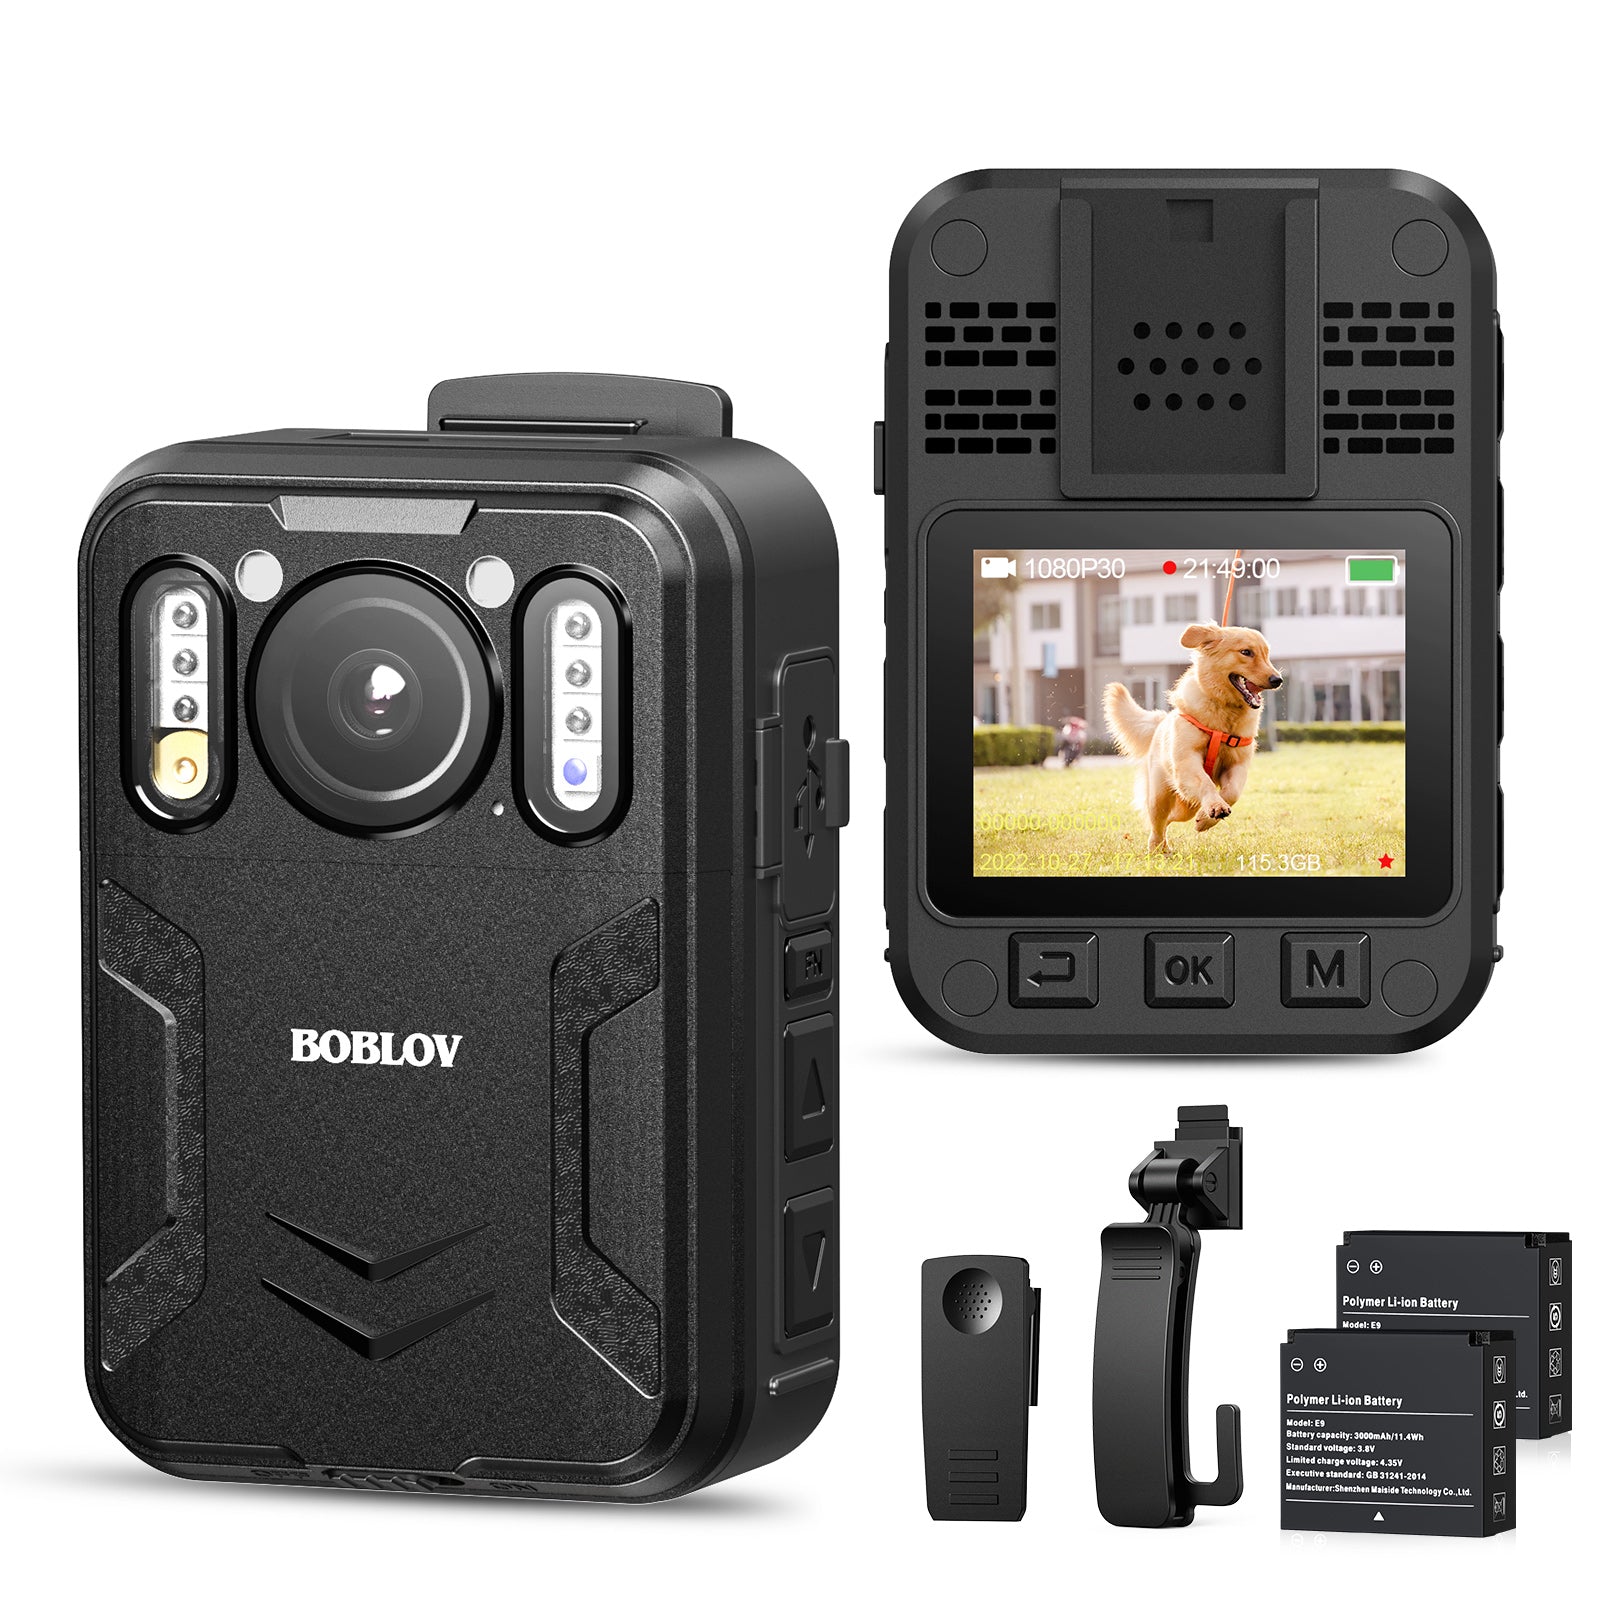 BOBLOV B4K2 4K body camera with GPS and two 3000mAh batteries for extended 14-16 hours recording, including charging dock2